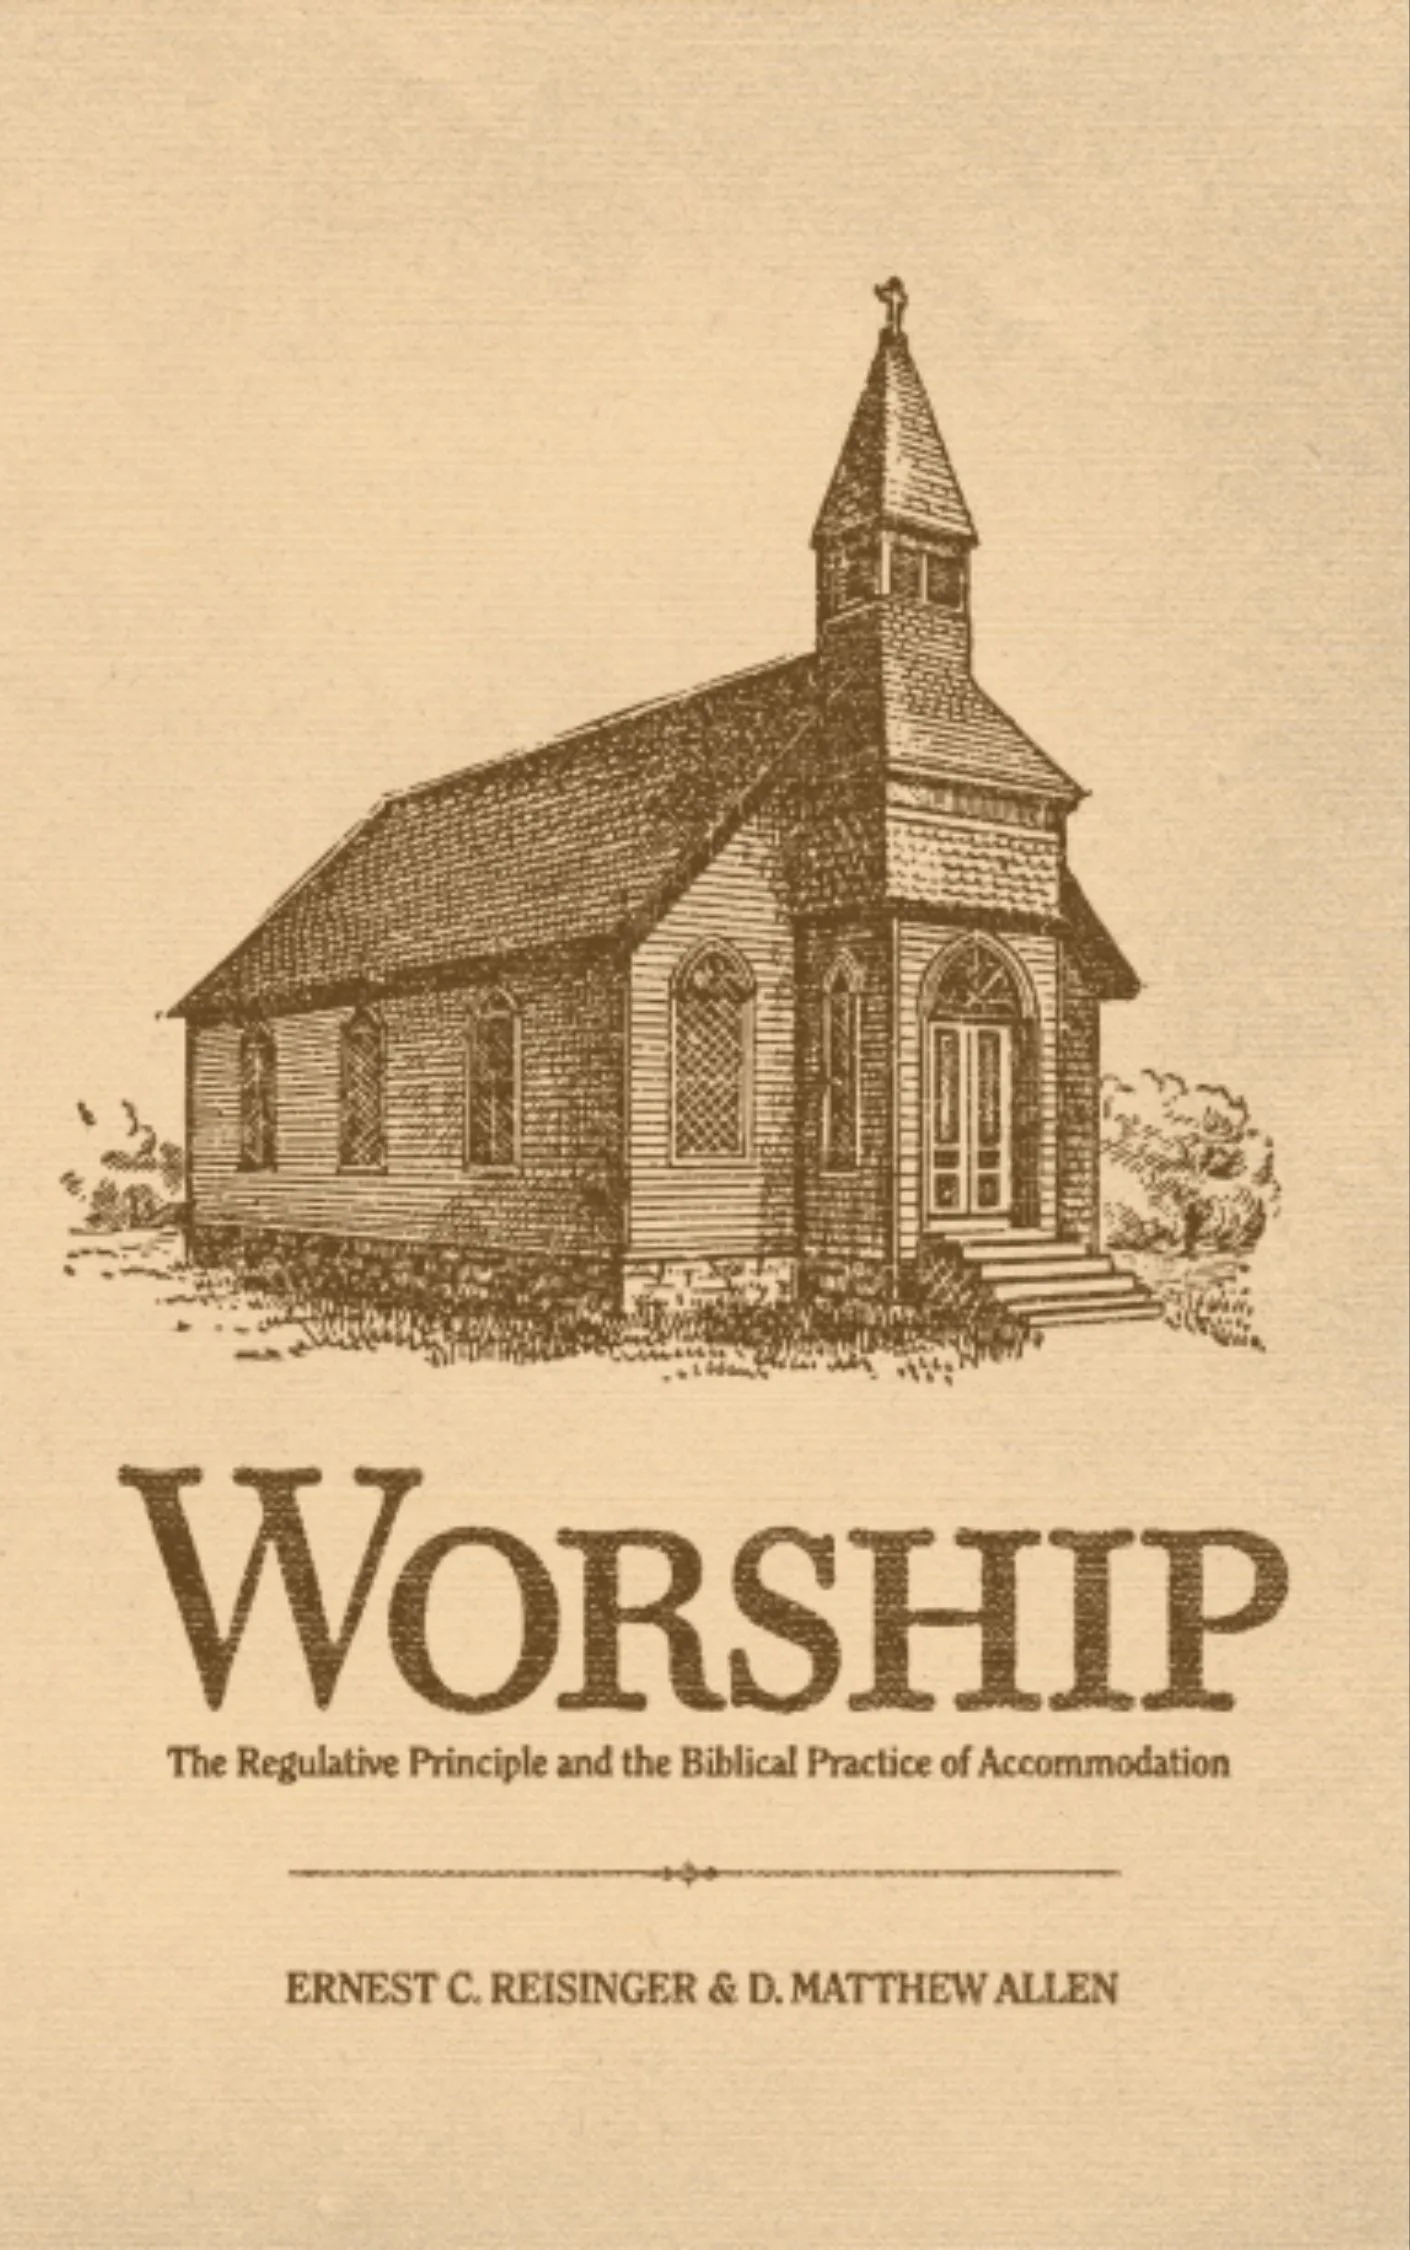 Worship: The Regulative Principle and the Biblical Practice of Accommodation by Ernest Reisinger